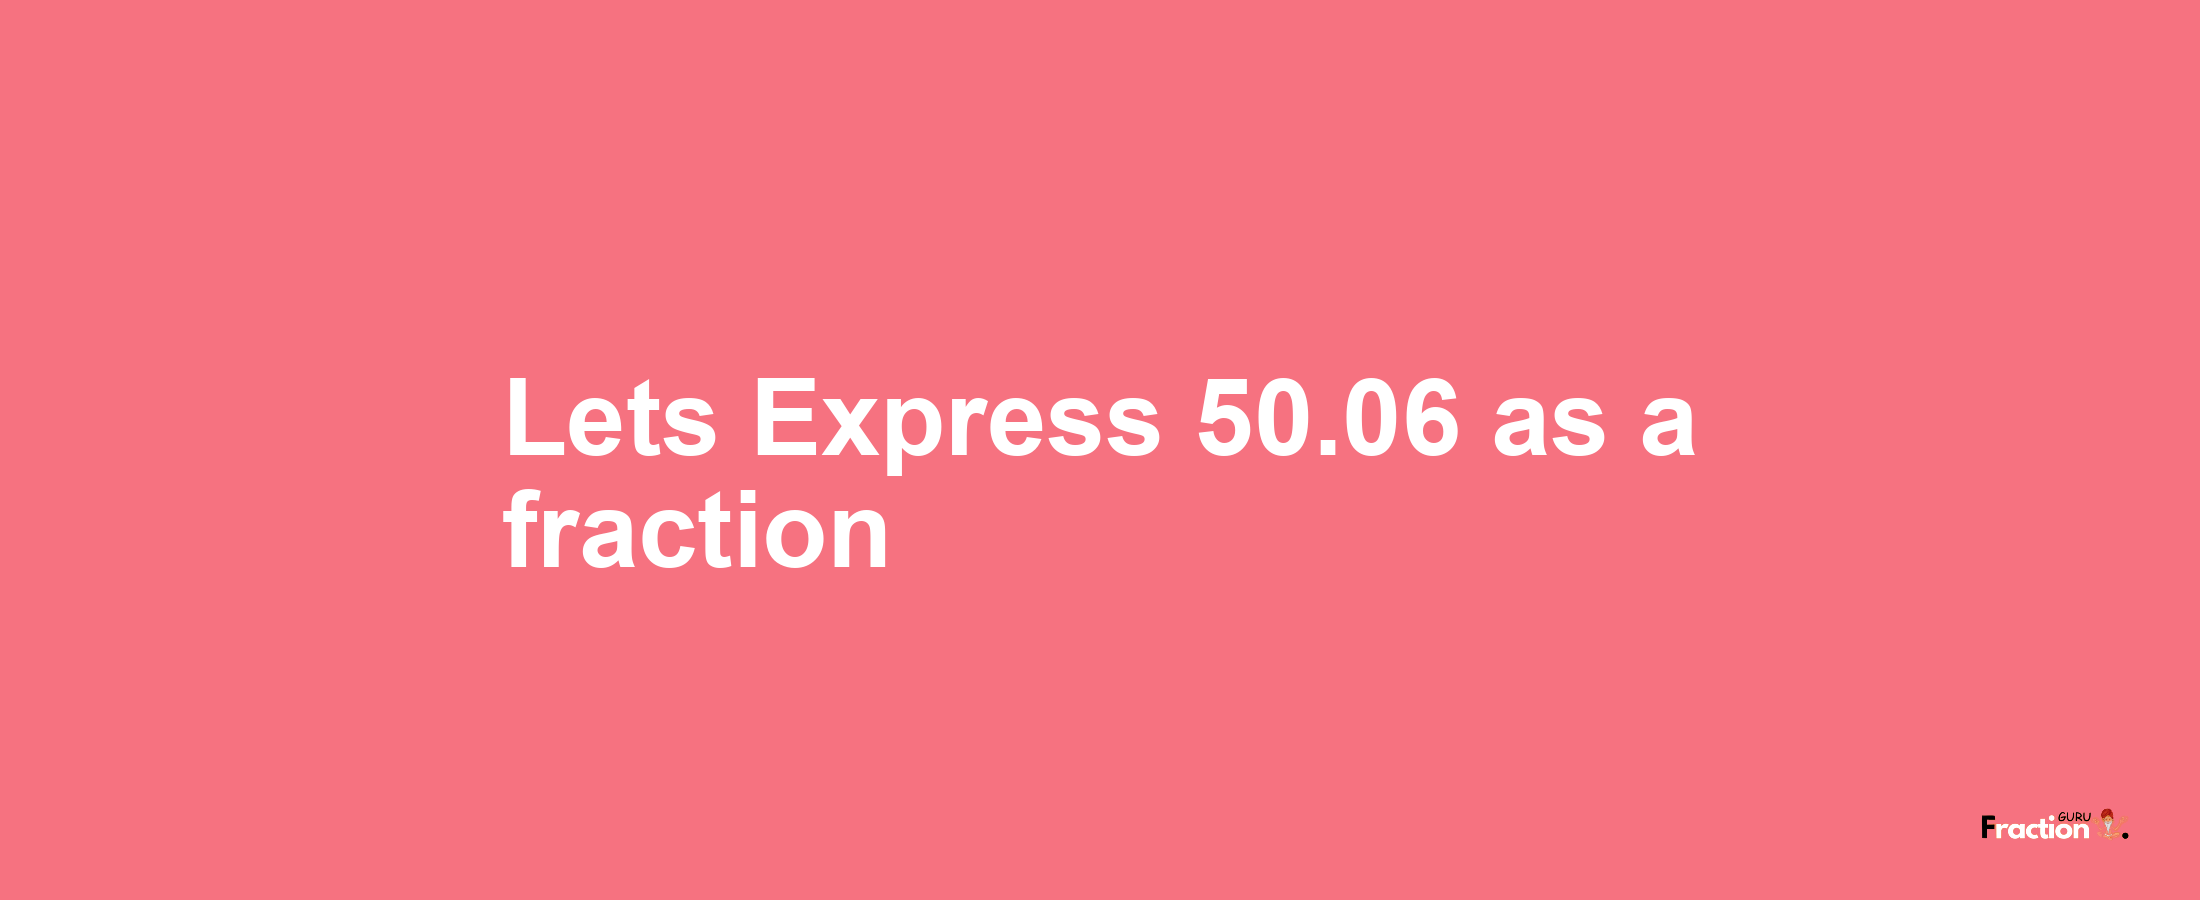 Lets Express 50.06 as afraction